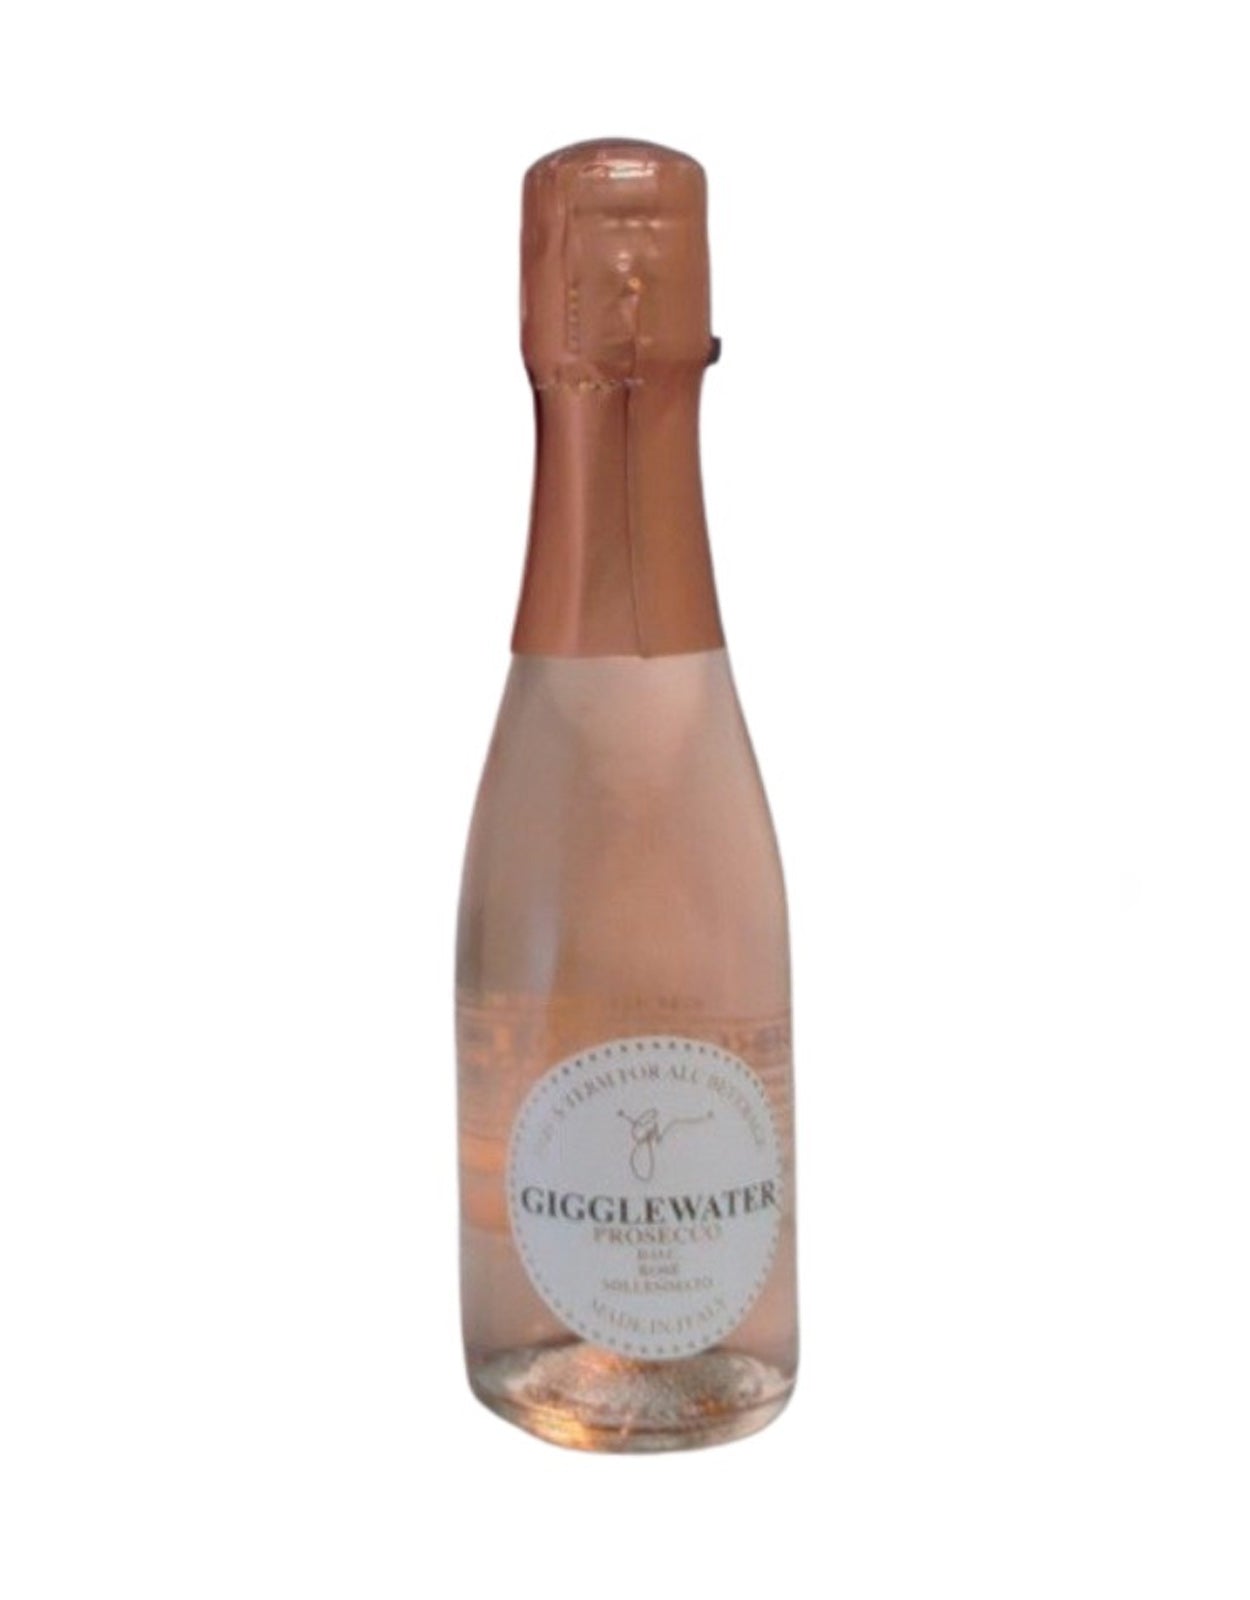 Gigglewater Prosecco Rose Piccolo 200 ml - 24 Bottles